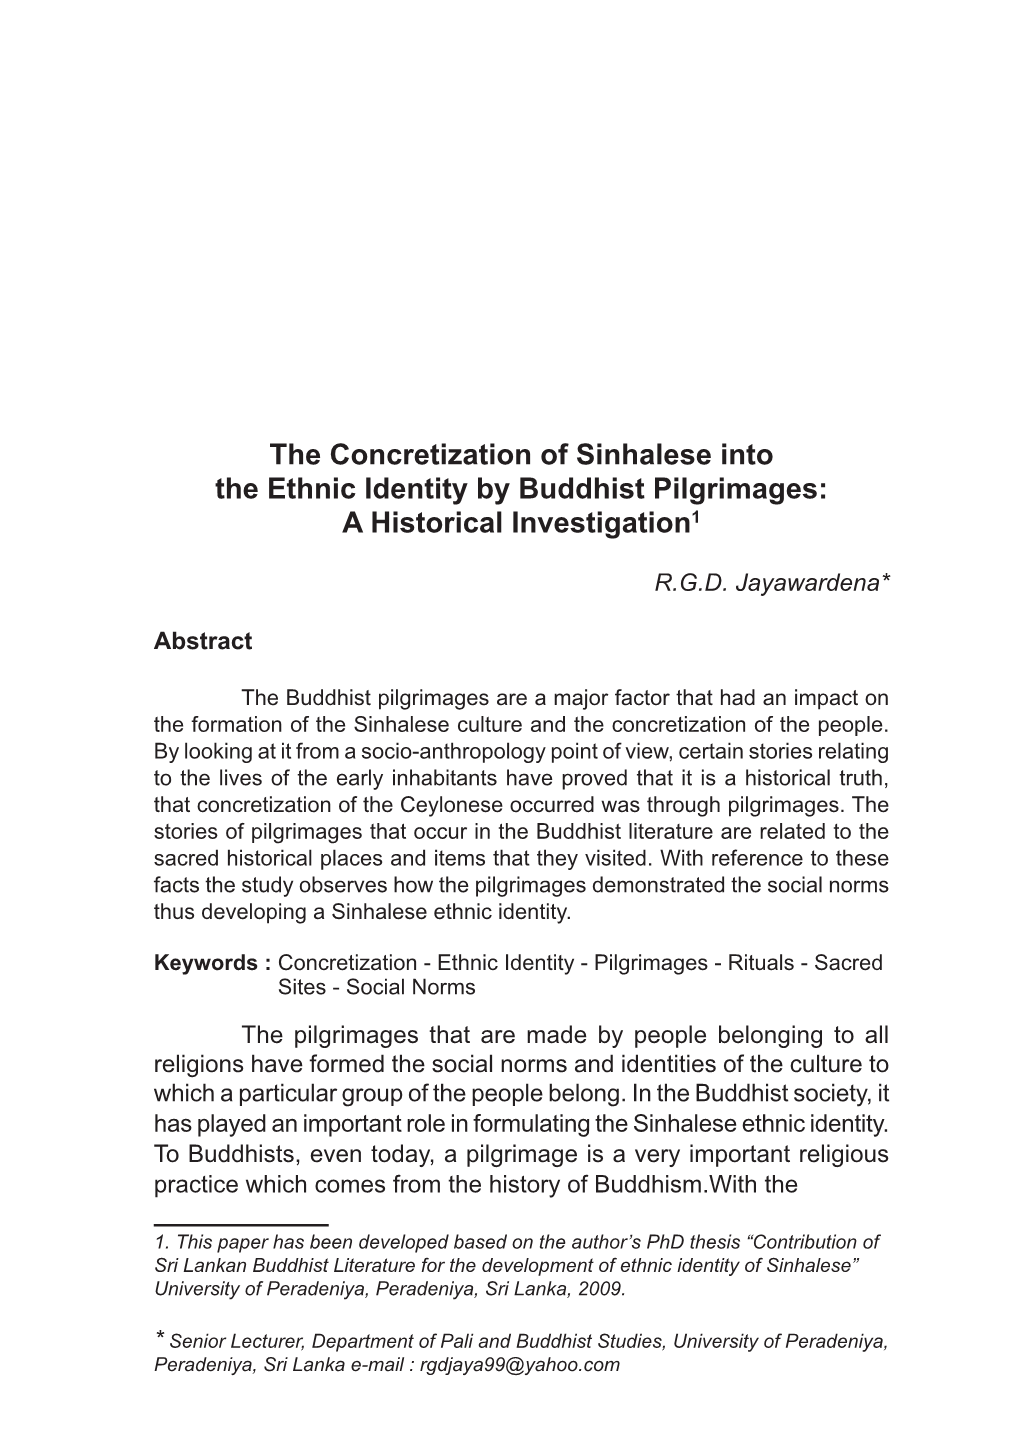 The Concretization of Sinhalese Into the Ethnic Identity by Buddhist Pilgrimages: a Historical Investigation1